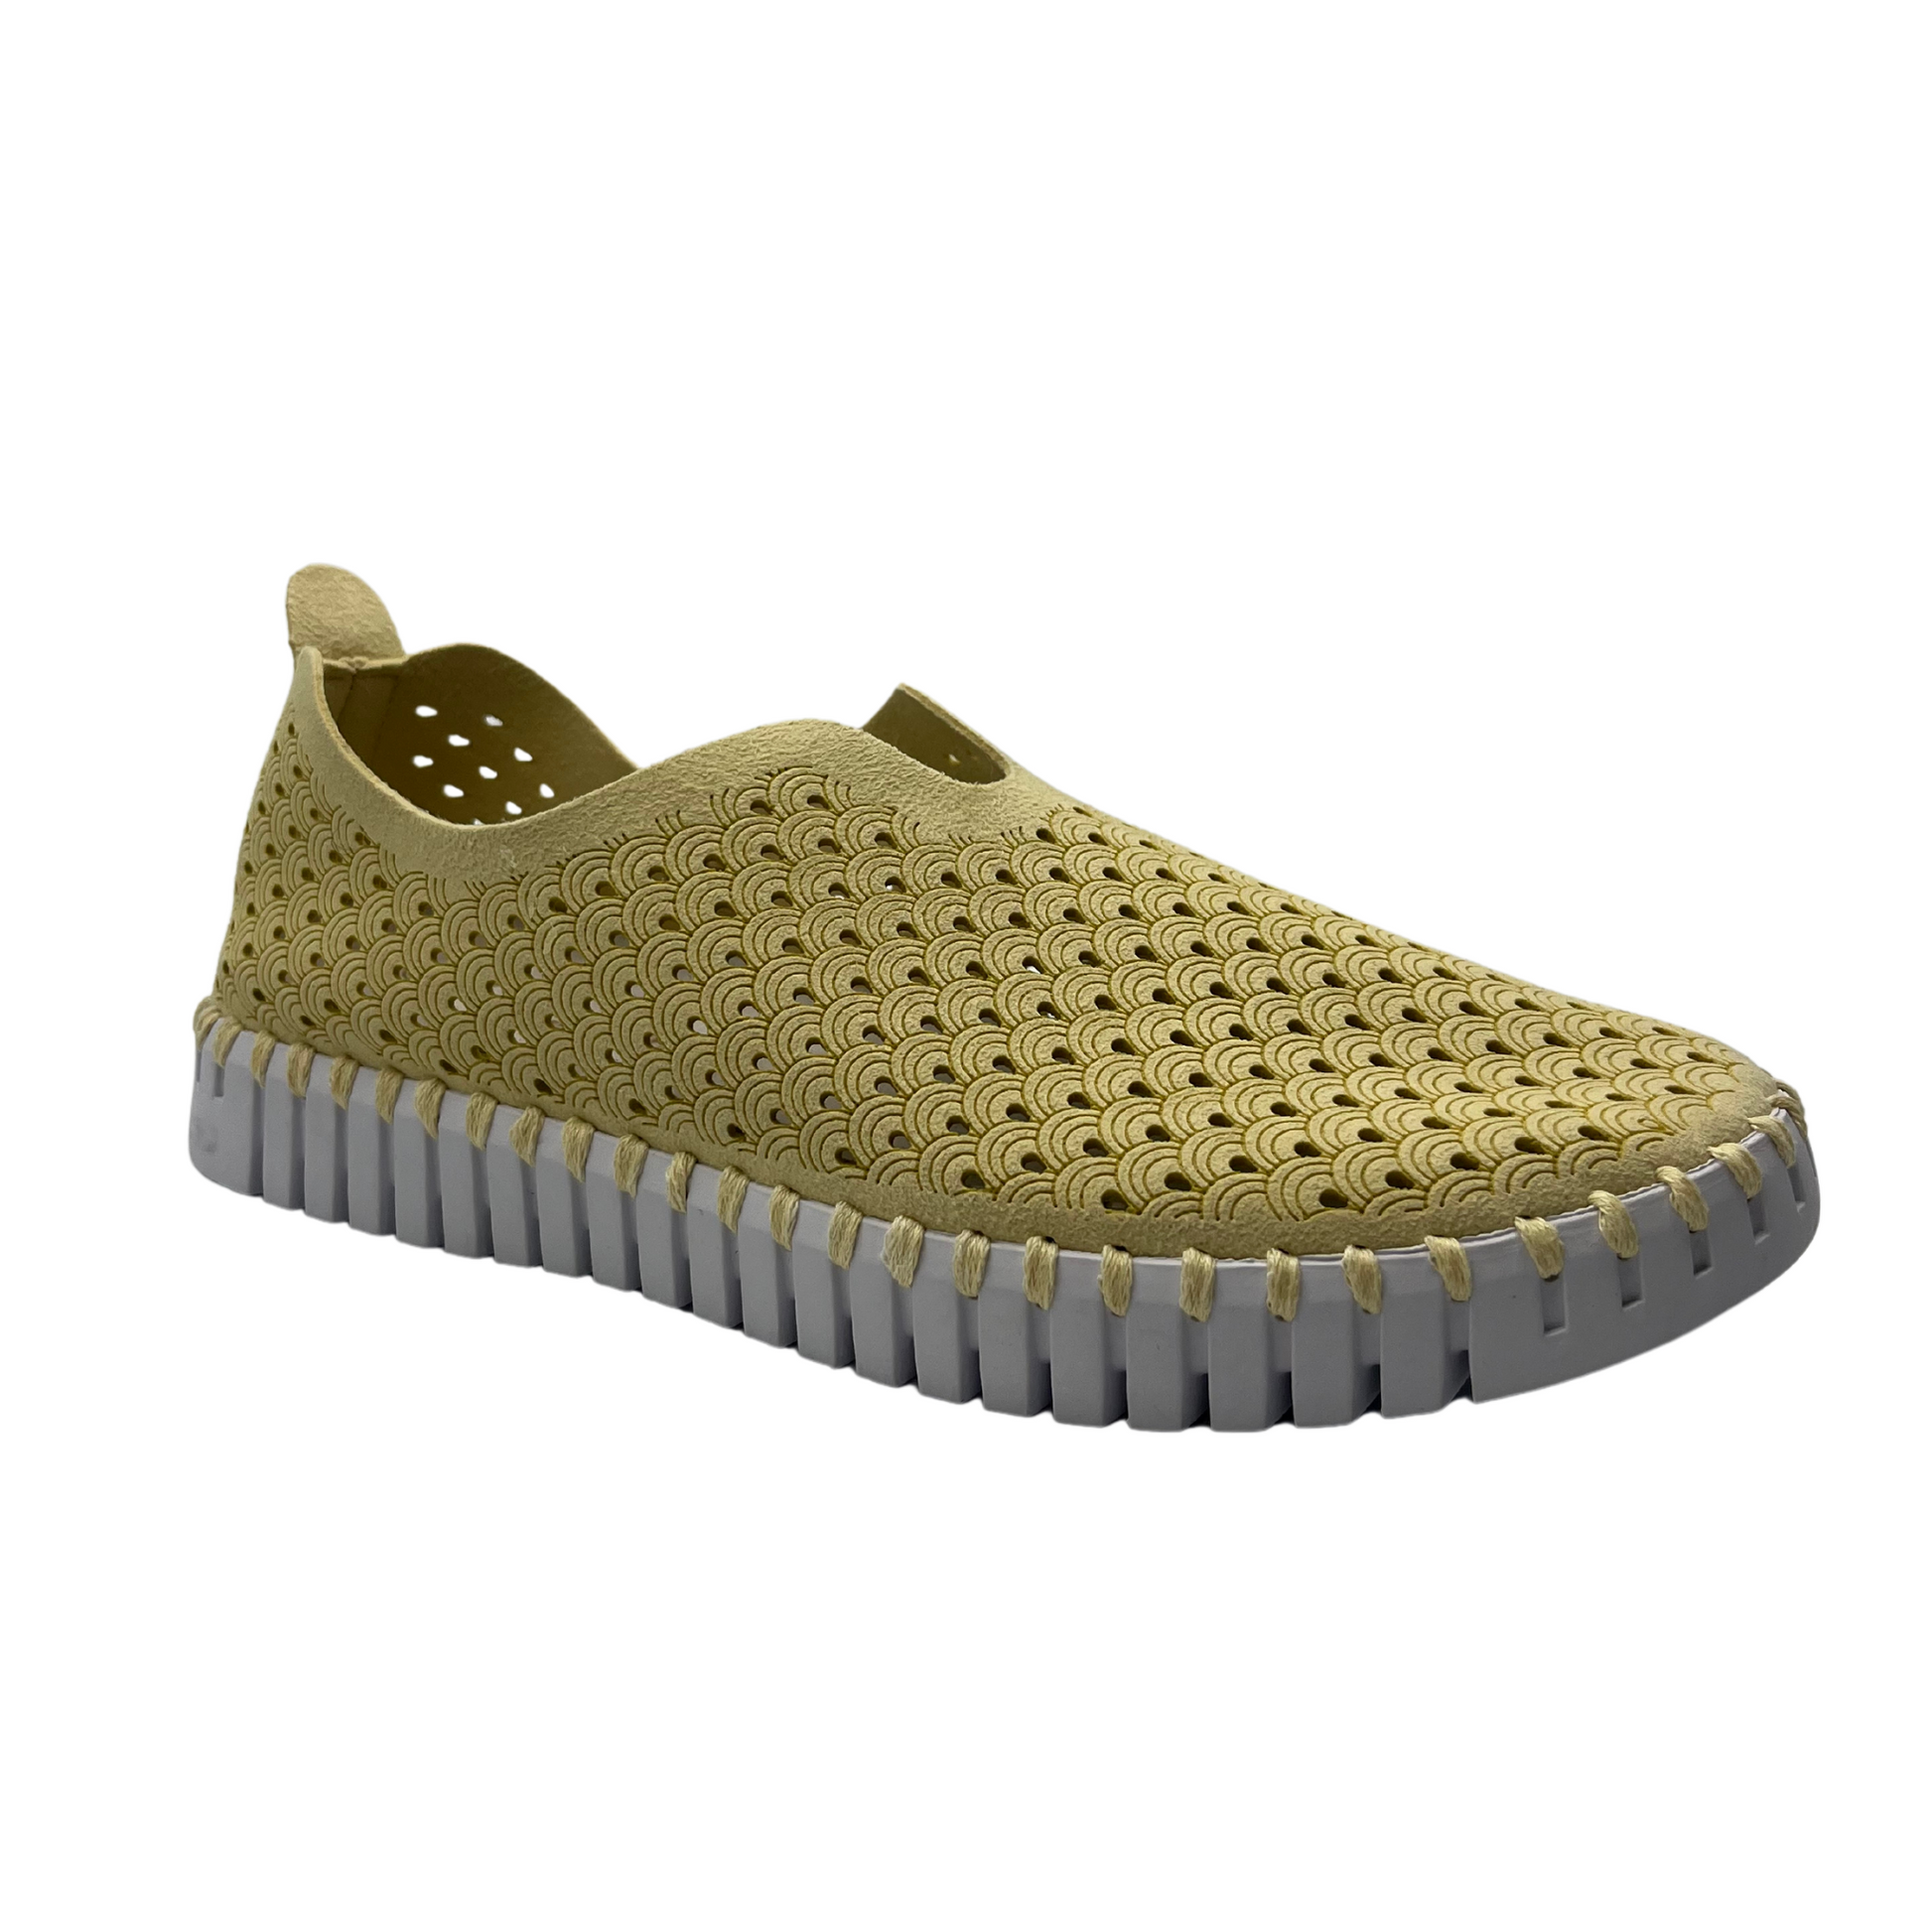 45 degree angled view of cream coloured slip on shoe with mesh design and white rubber outsole